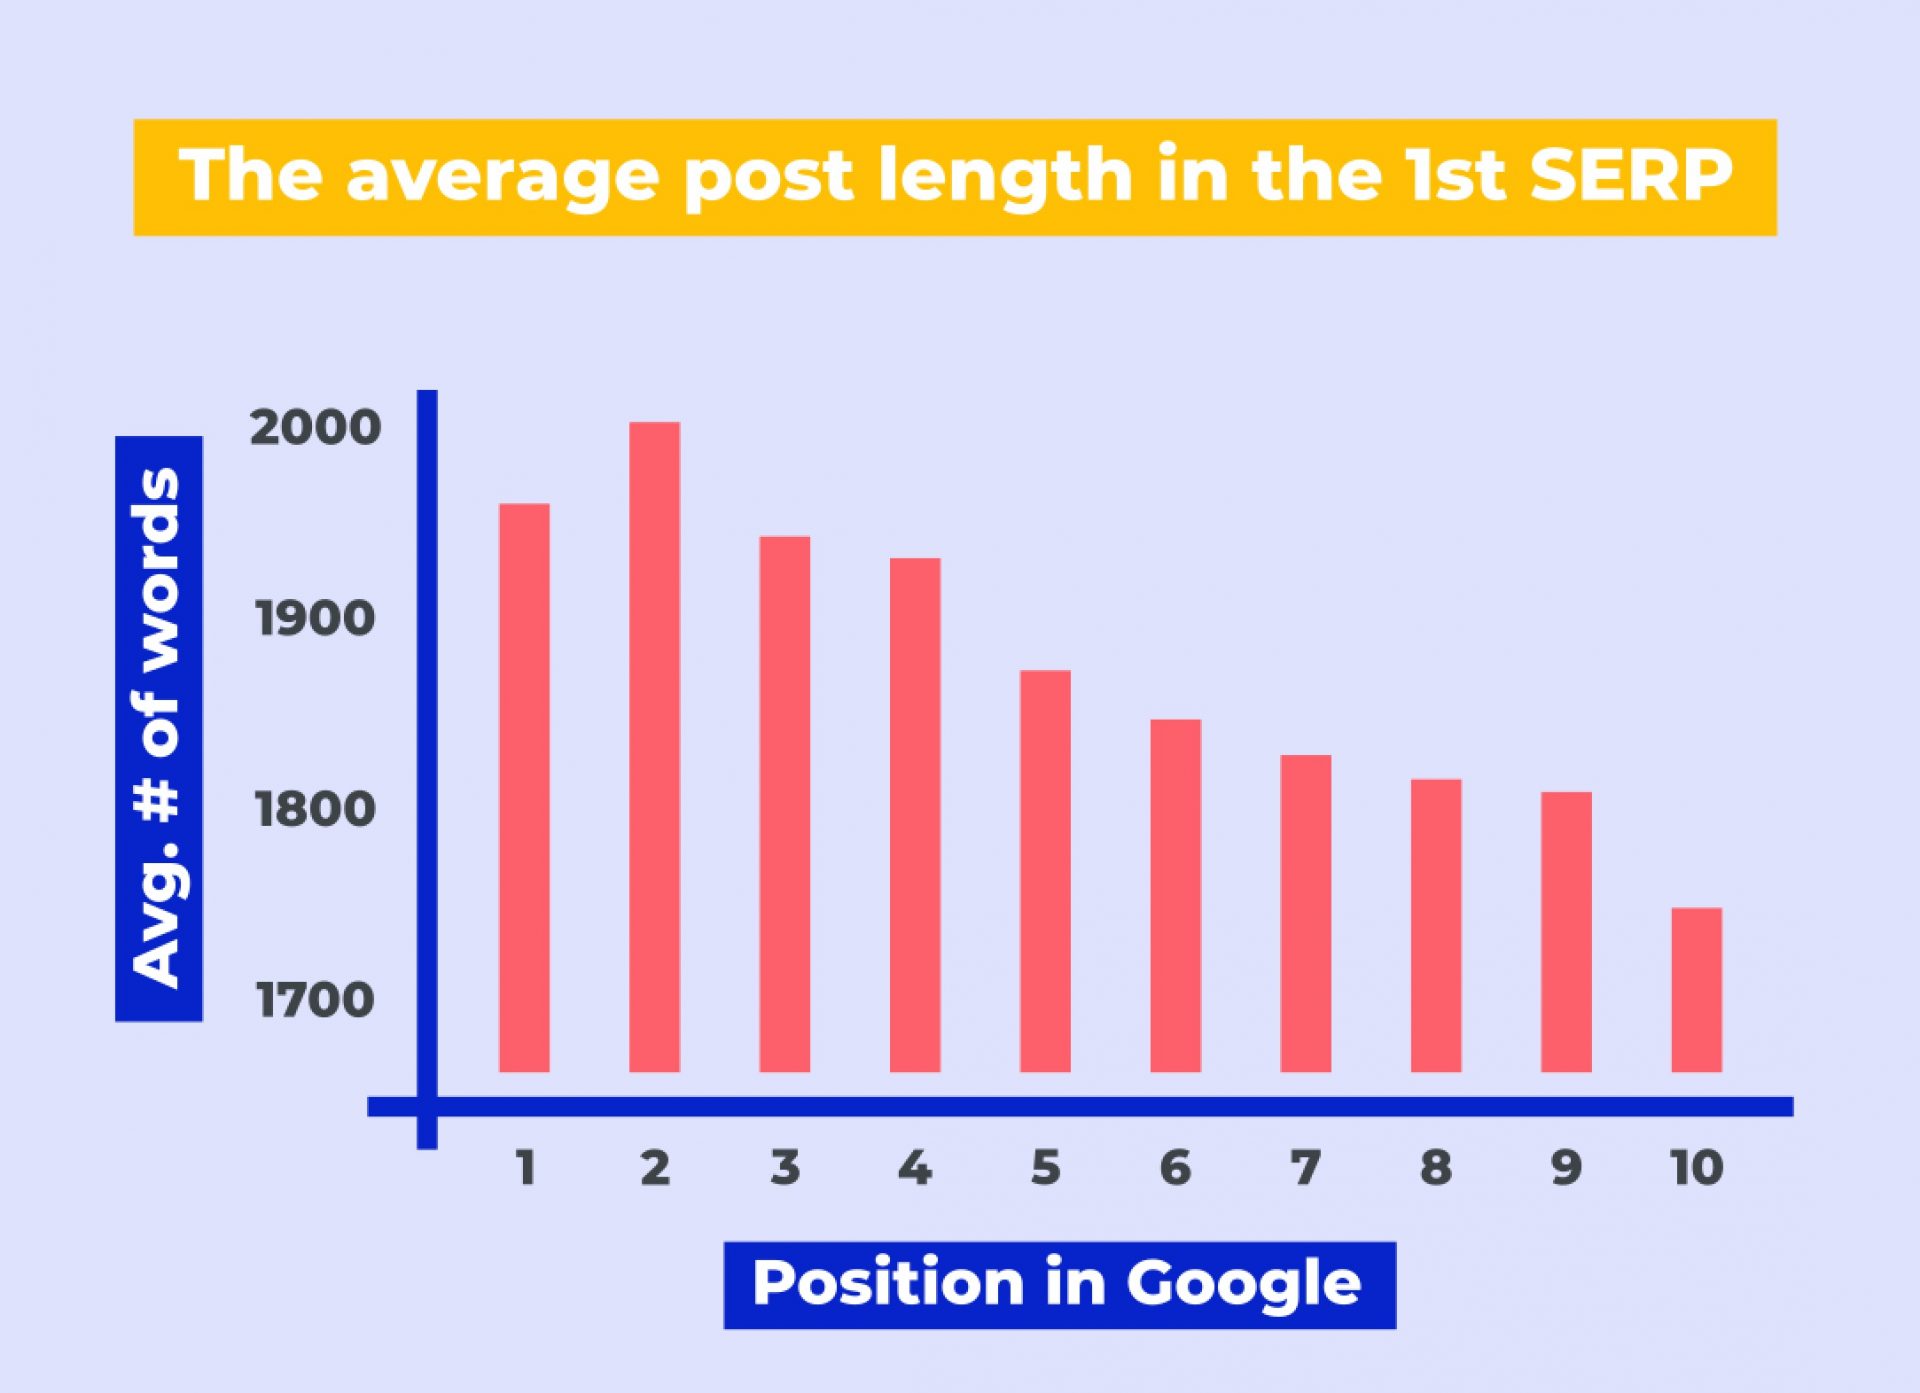 Optimum number of words in a post are between 1900 and 2000. The fewer words the worse Google ranking.